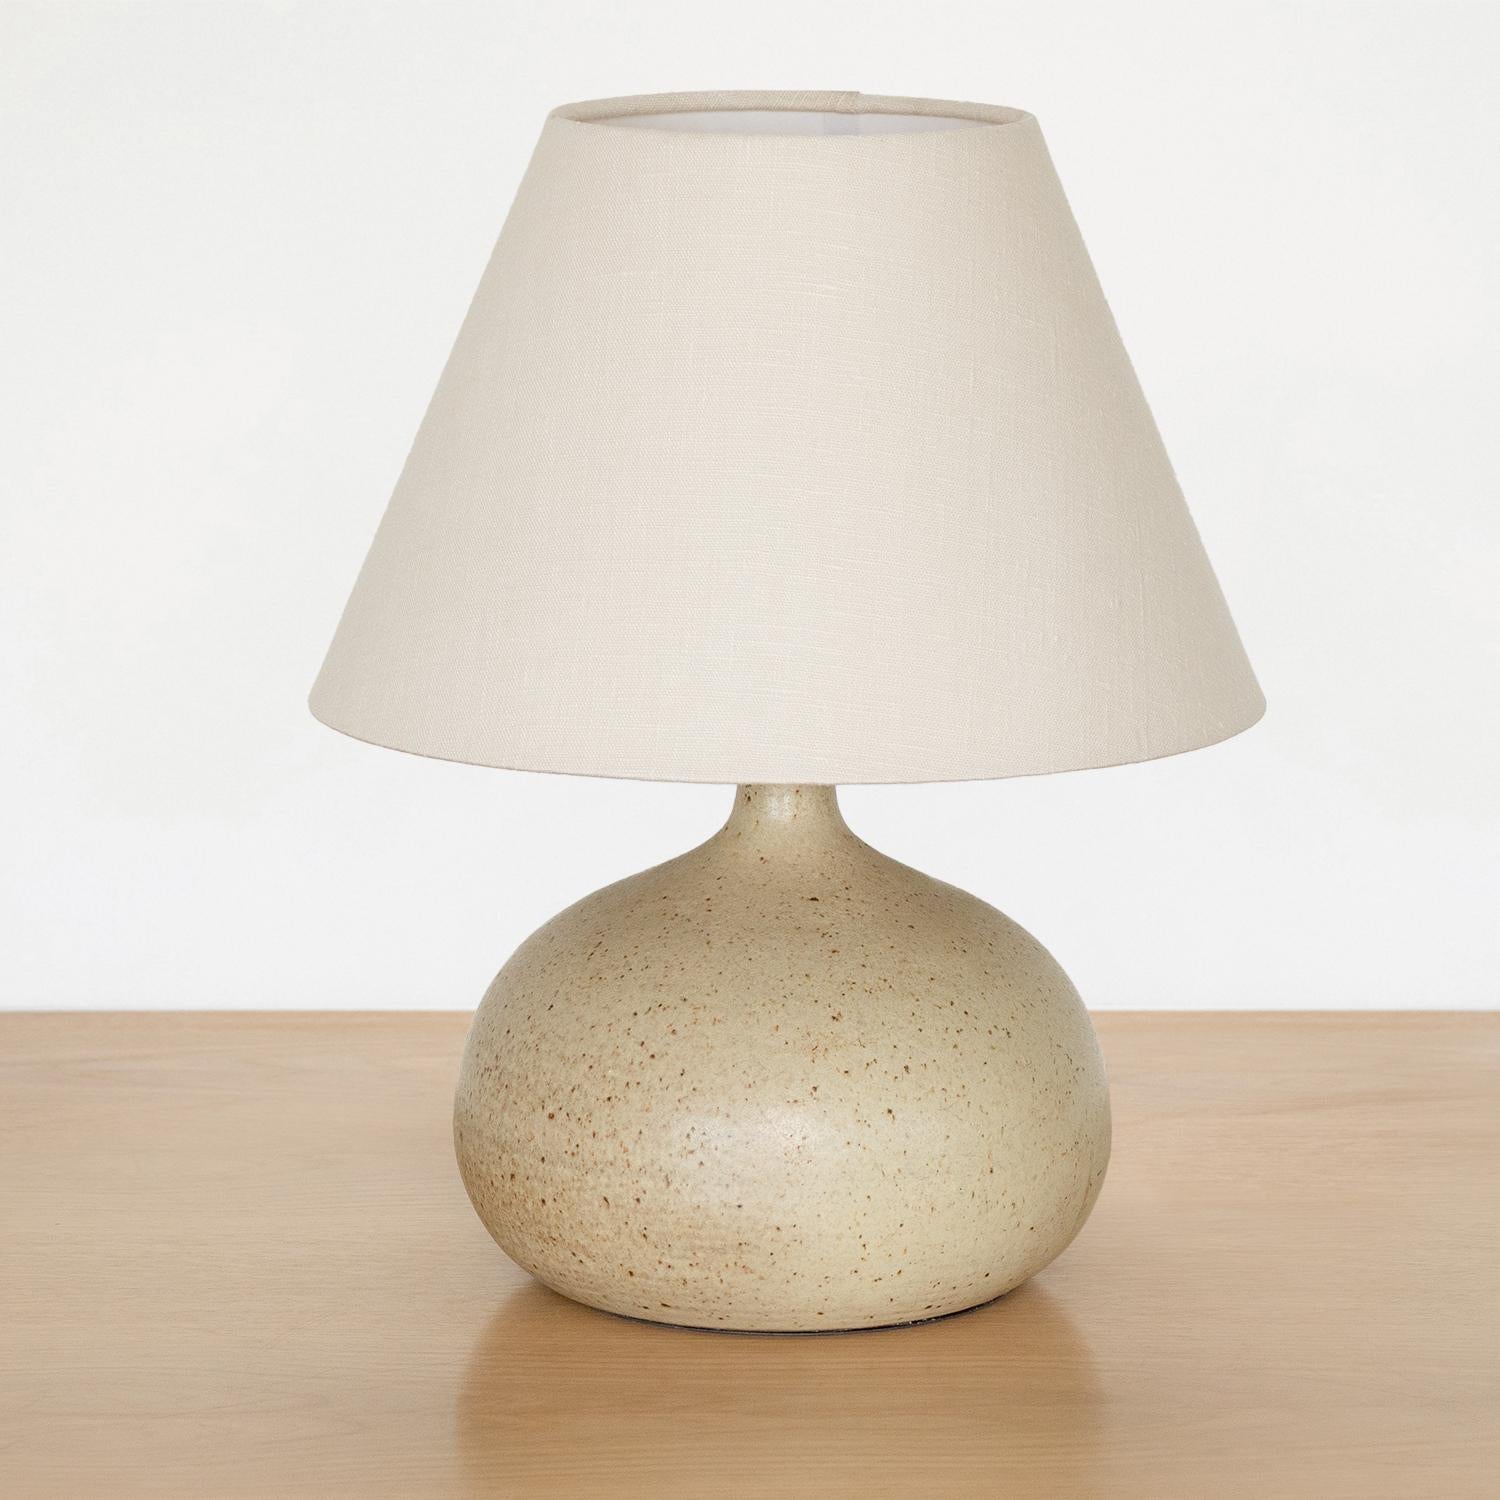 Vintage ceramic bulbous lamp from France, 1960s. Matte glazed ceramic base in neutral tones with light brown speckled coloring. Newly rewired with new tapered linen shade.